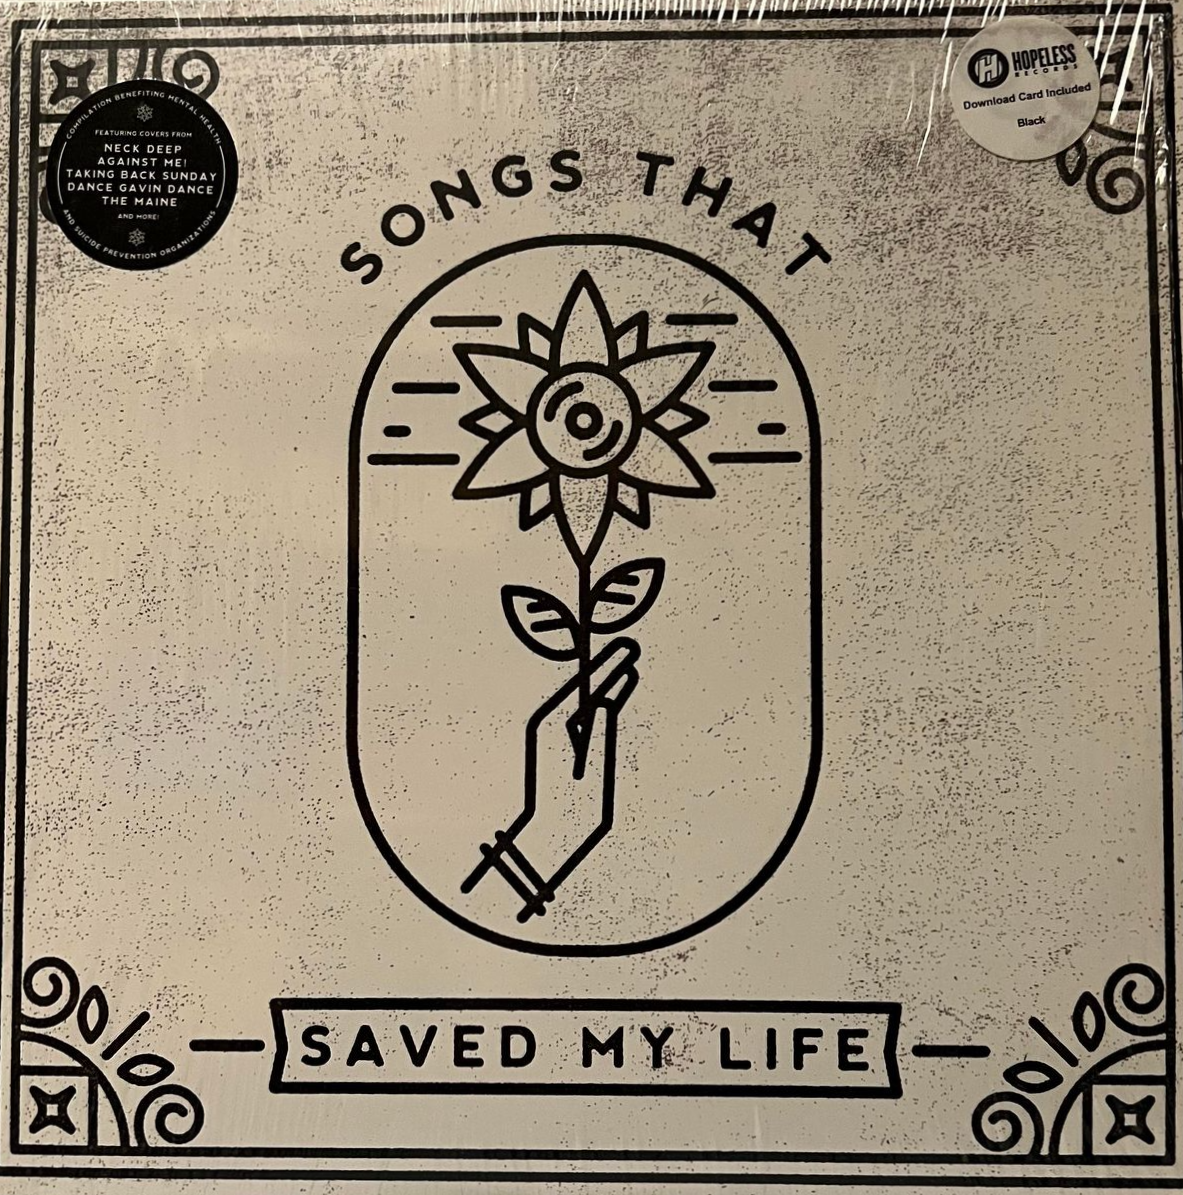 VARIOUS - SONGS THAT SAVED MY LIFE